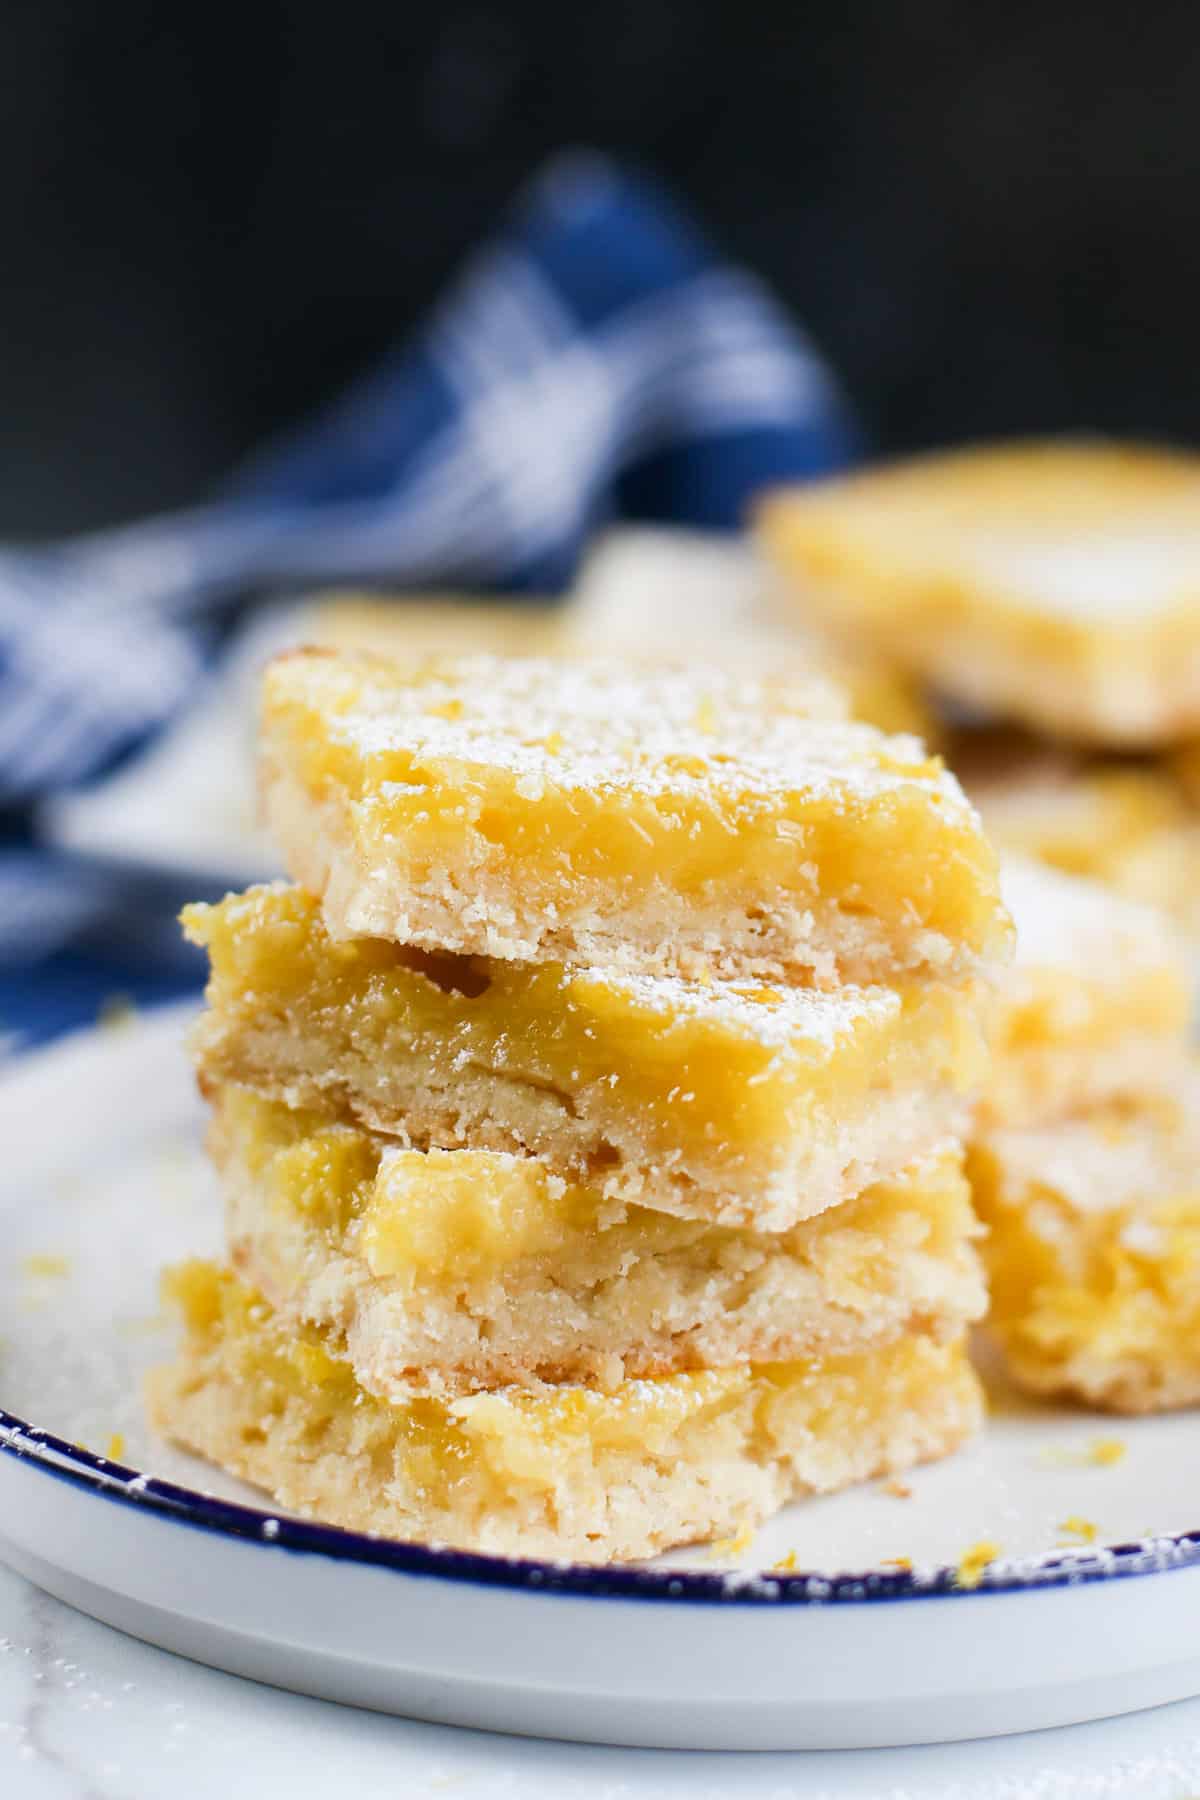 Lemon bars stacked up on a plate with powdered sugar sprinkled all over.